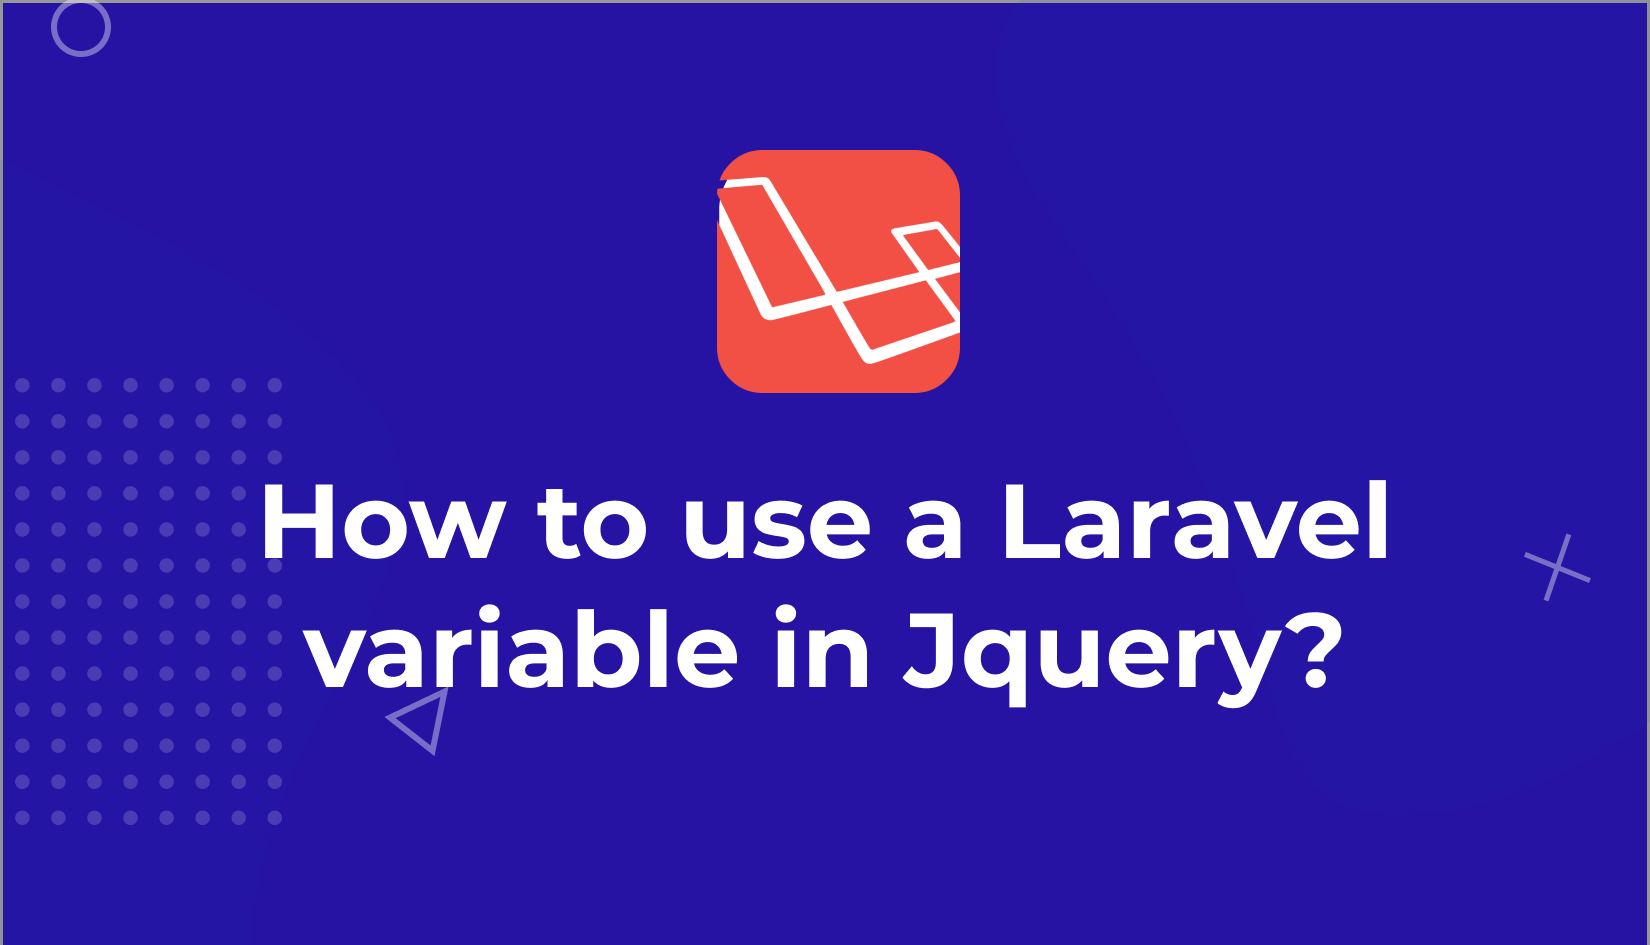 How to use a Laravel variable in Jquery?